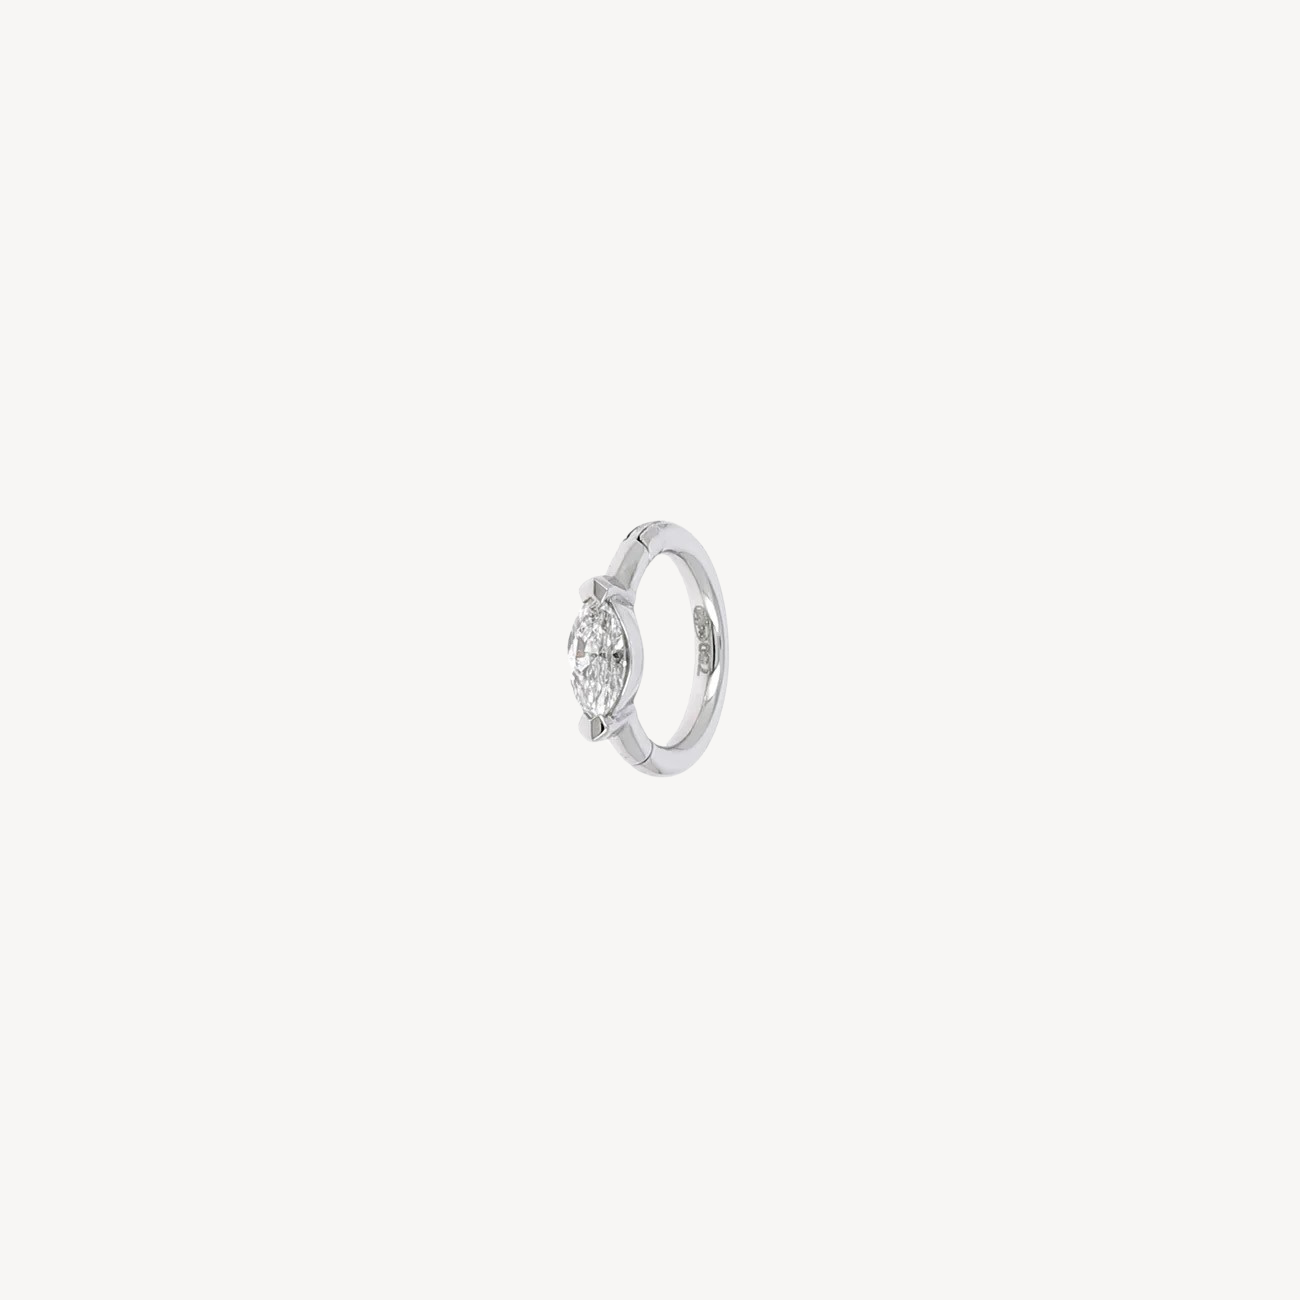 6.5mm 4.5x2mm marquise white gold hoop